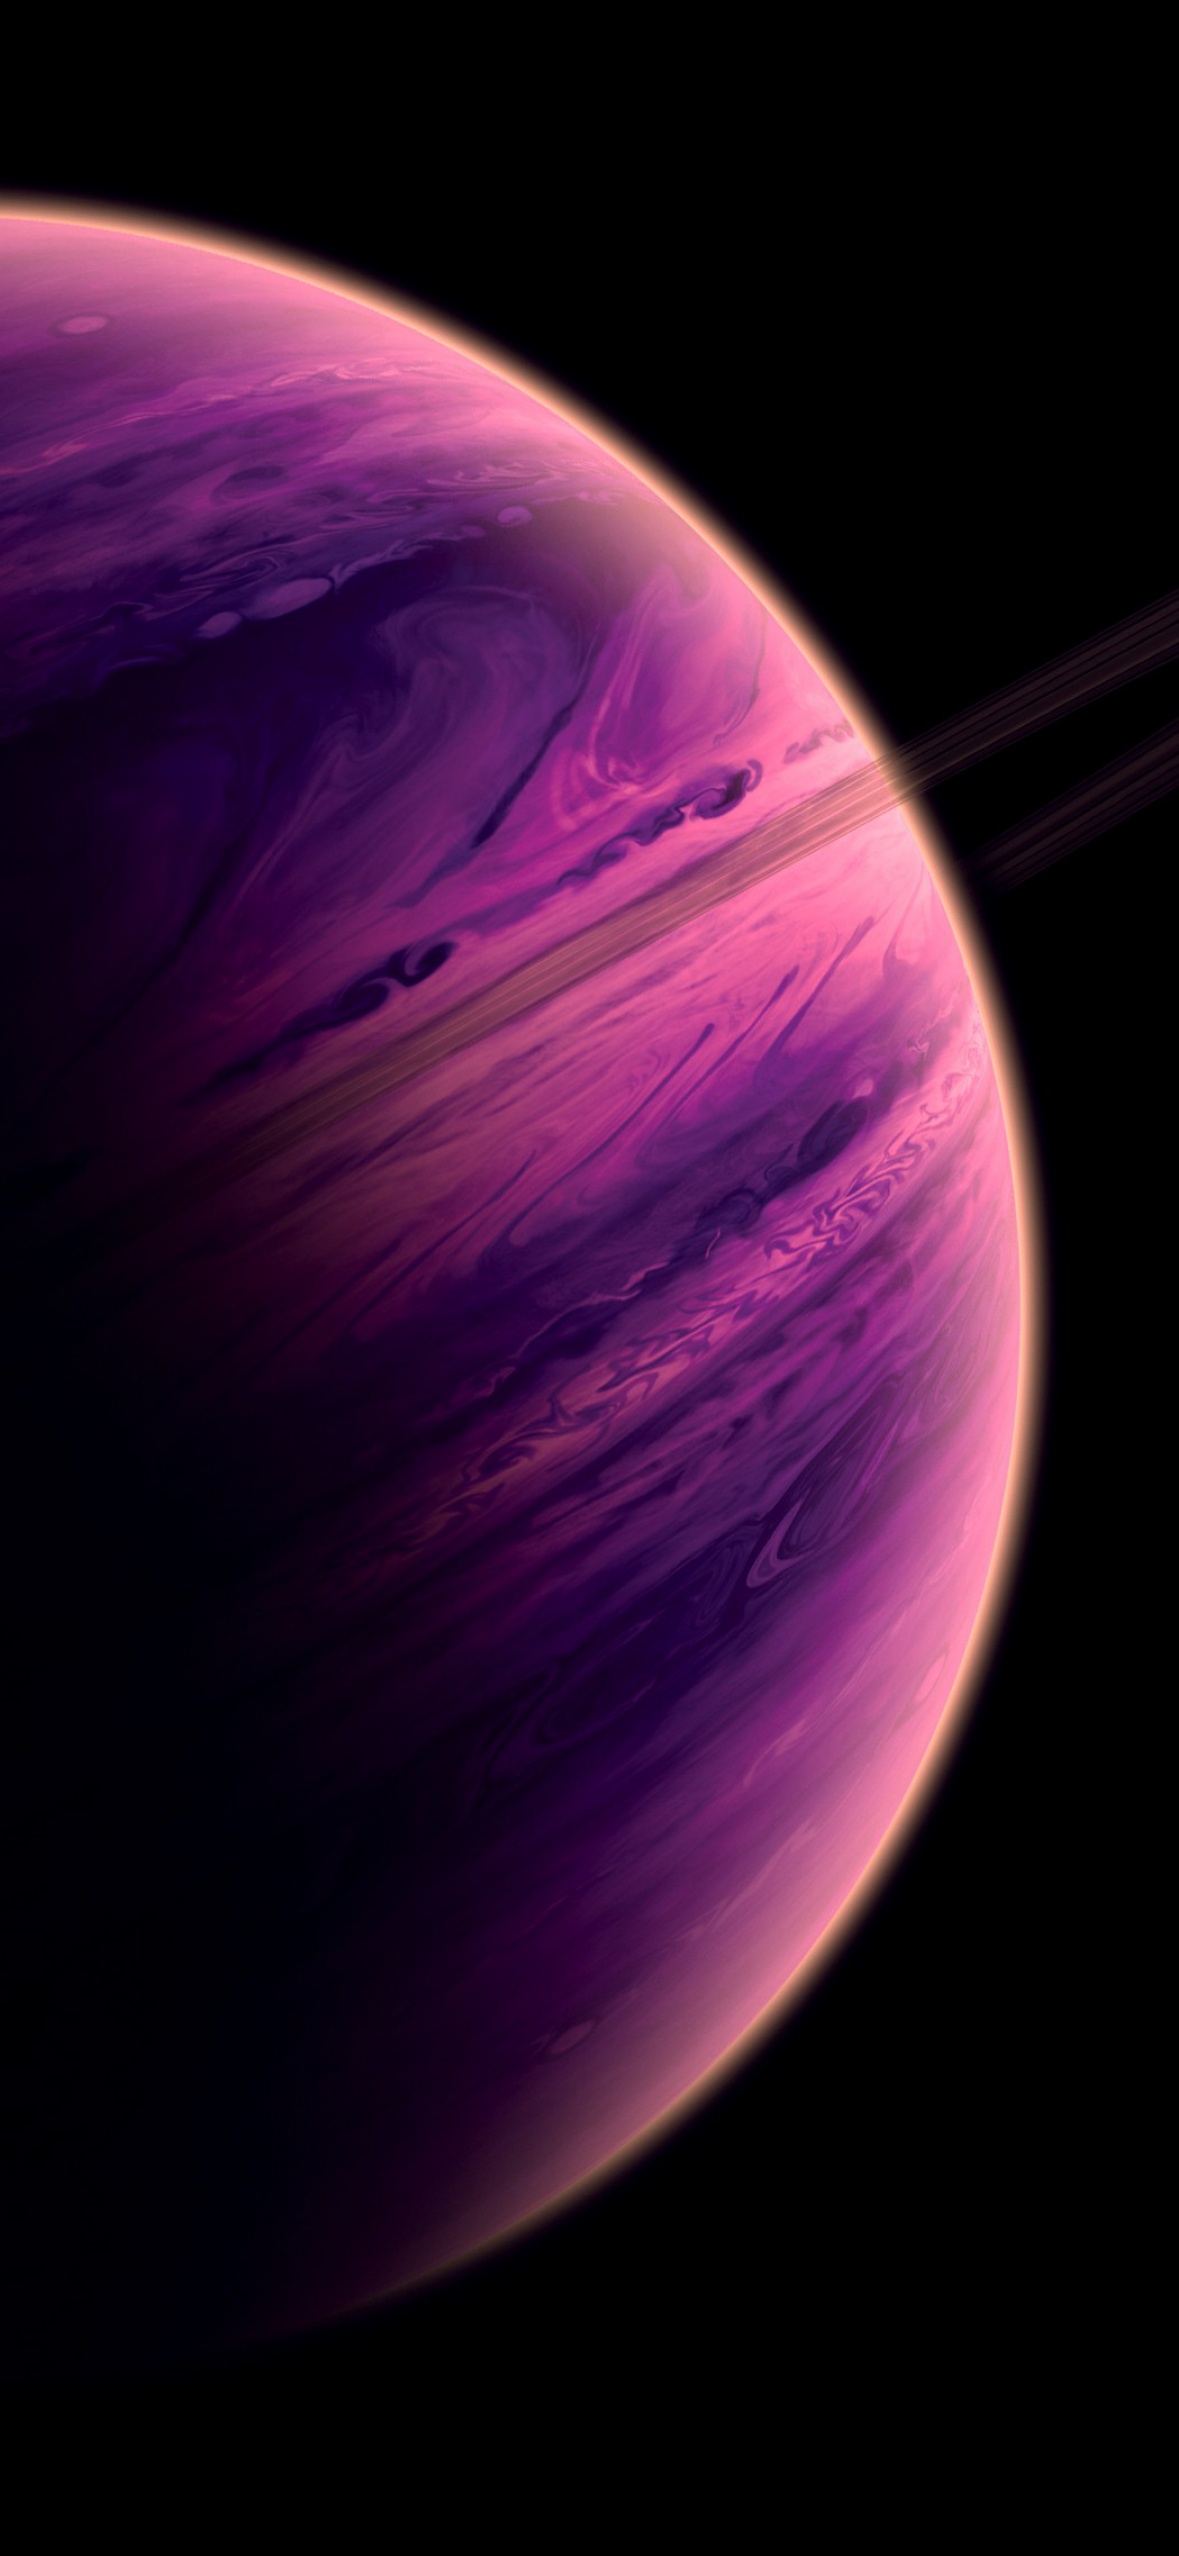 Space View from Road iPhone Wallpaper - iPhone Wallpapers : iPhone  Wallpapers | Space iphone wallpaper, Iphone wallpaper planets, Iphone  wallpaper